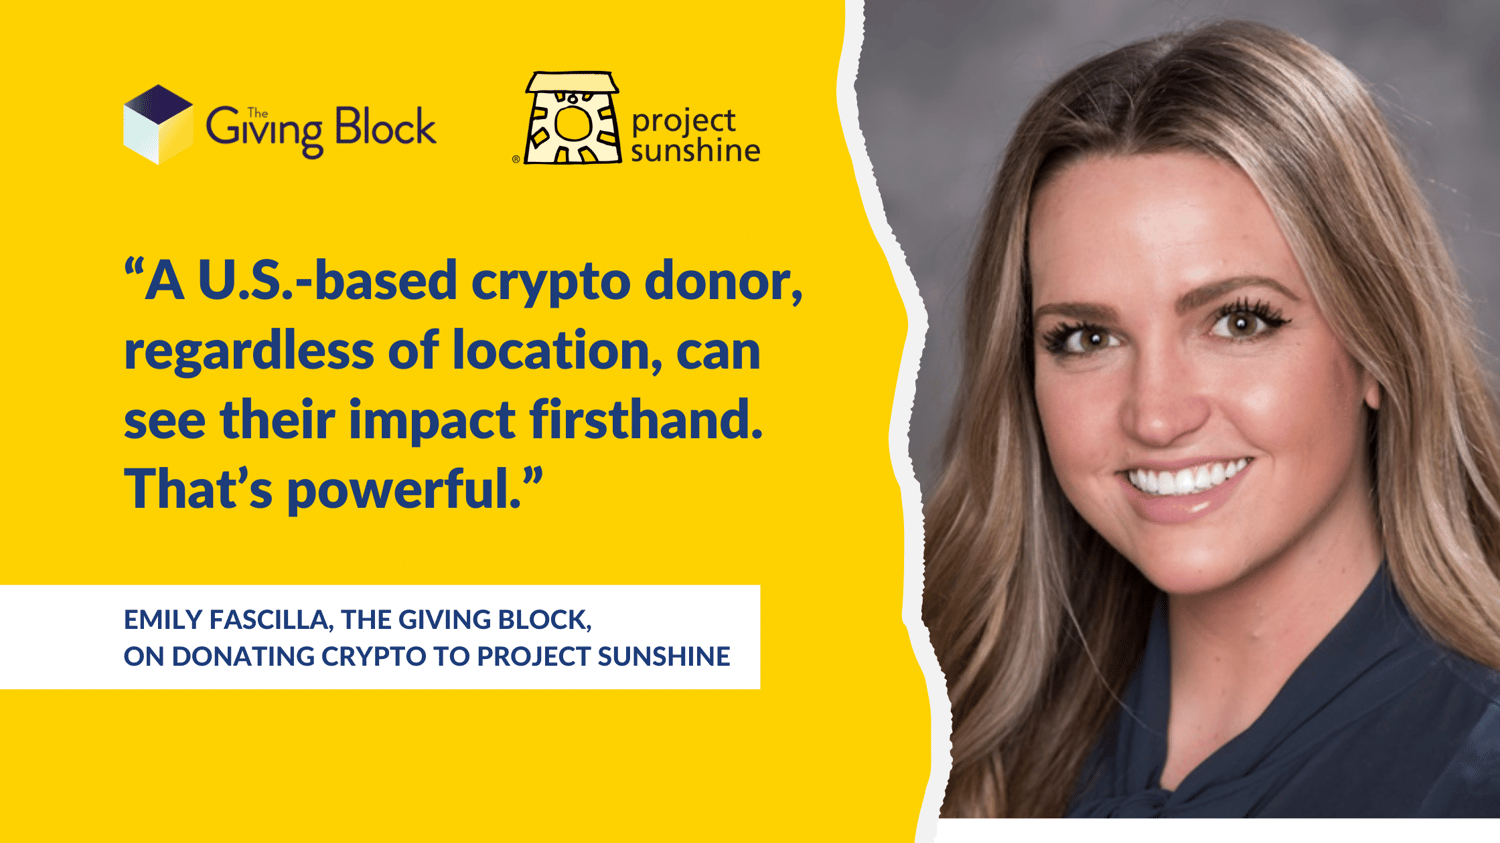 “A U.S.-based crypto donor regardless of location, can see their impact firsthand. That’s powerful.”